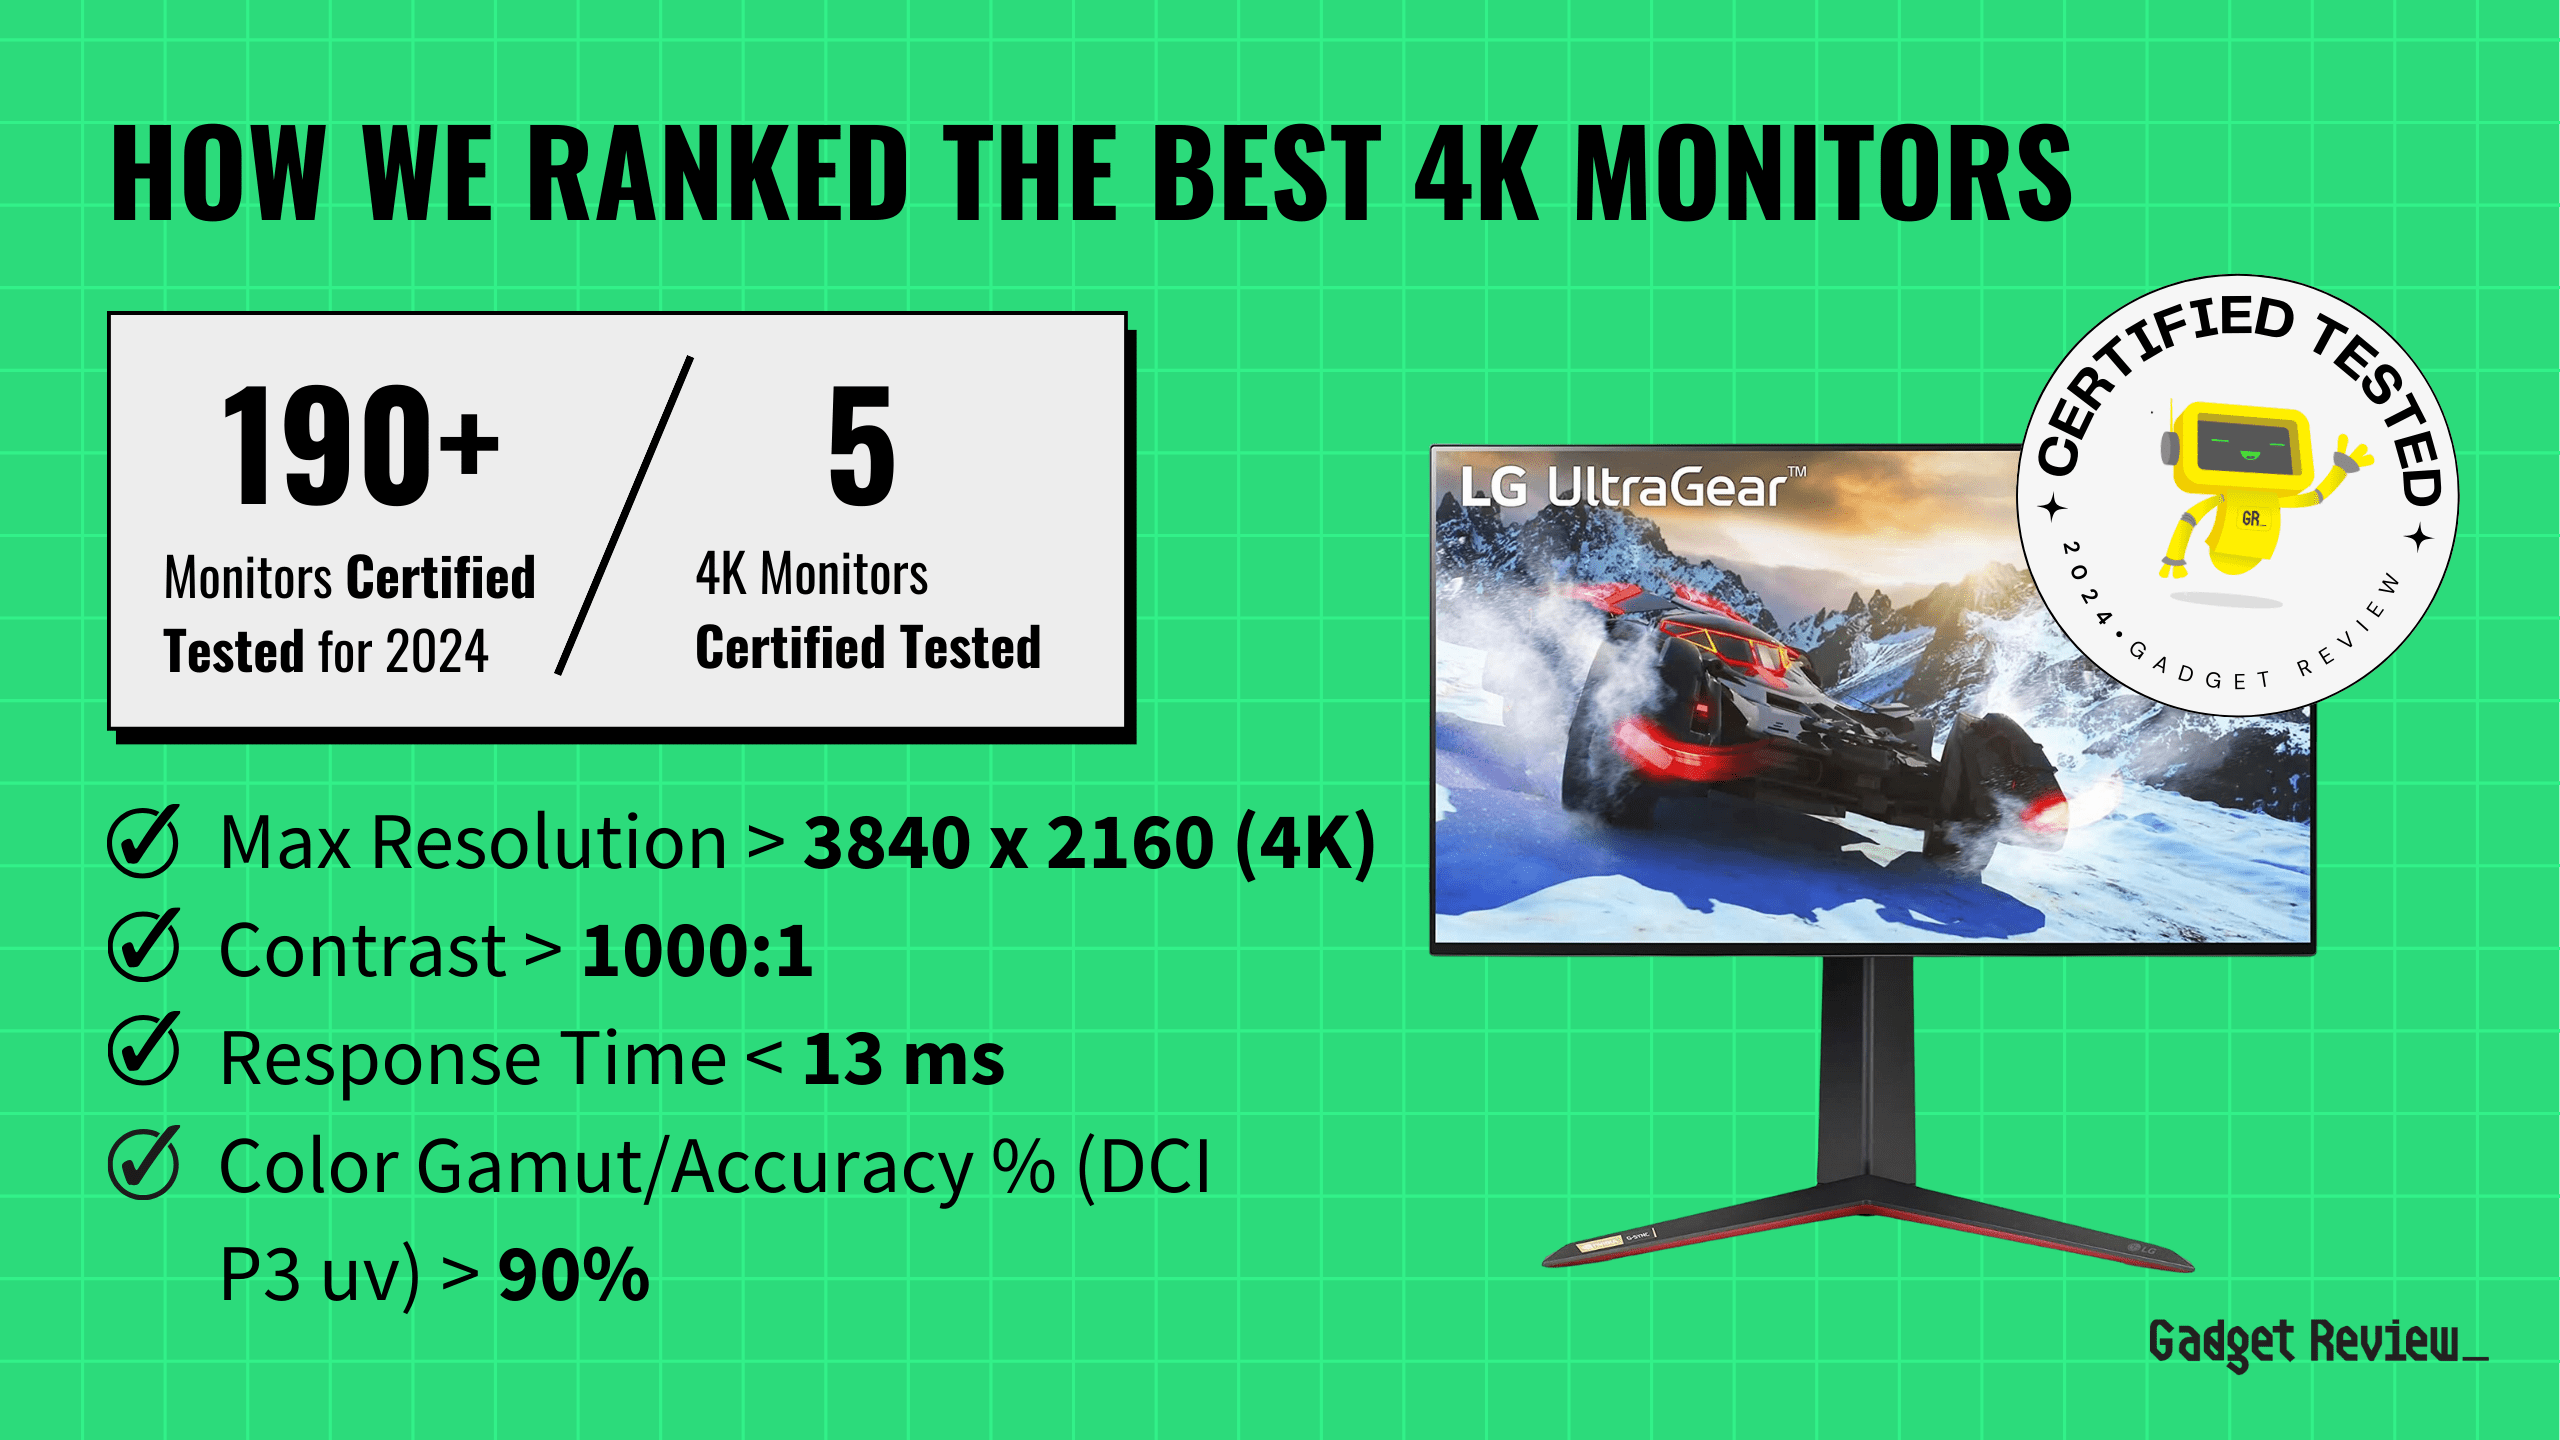 What Are The 5 Top 4K Monitors?